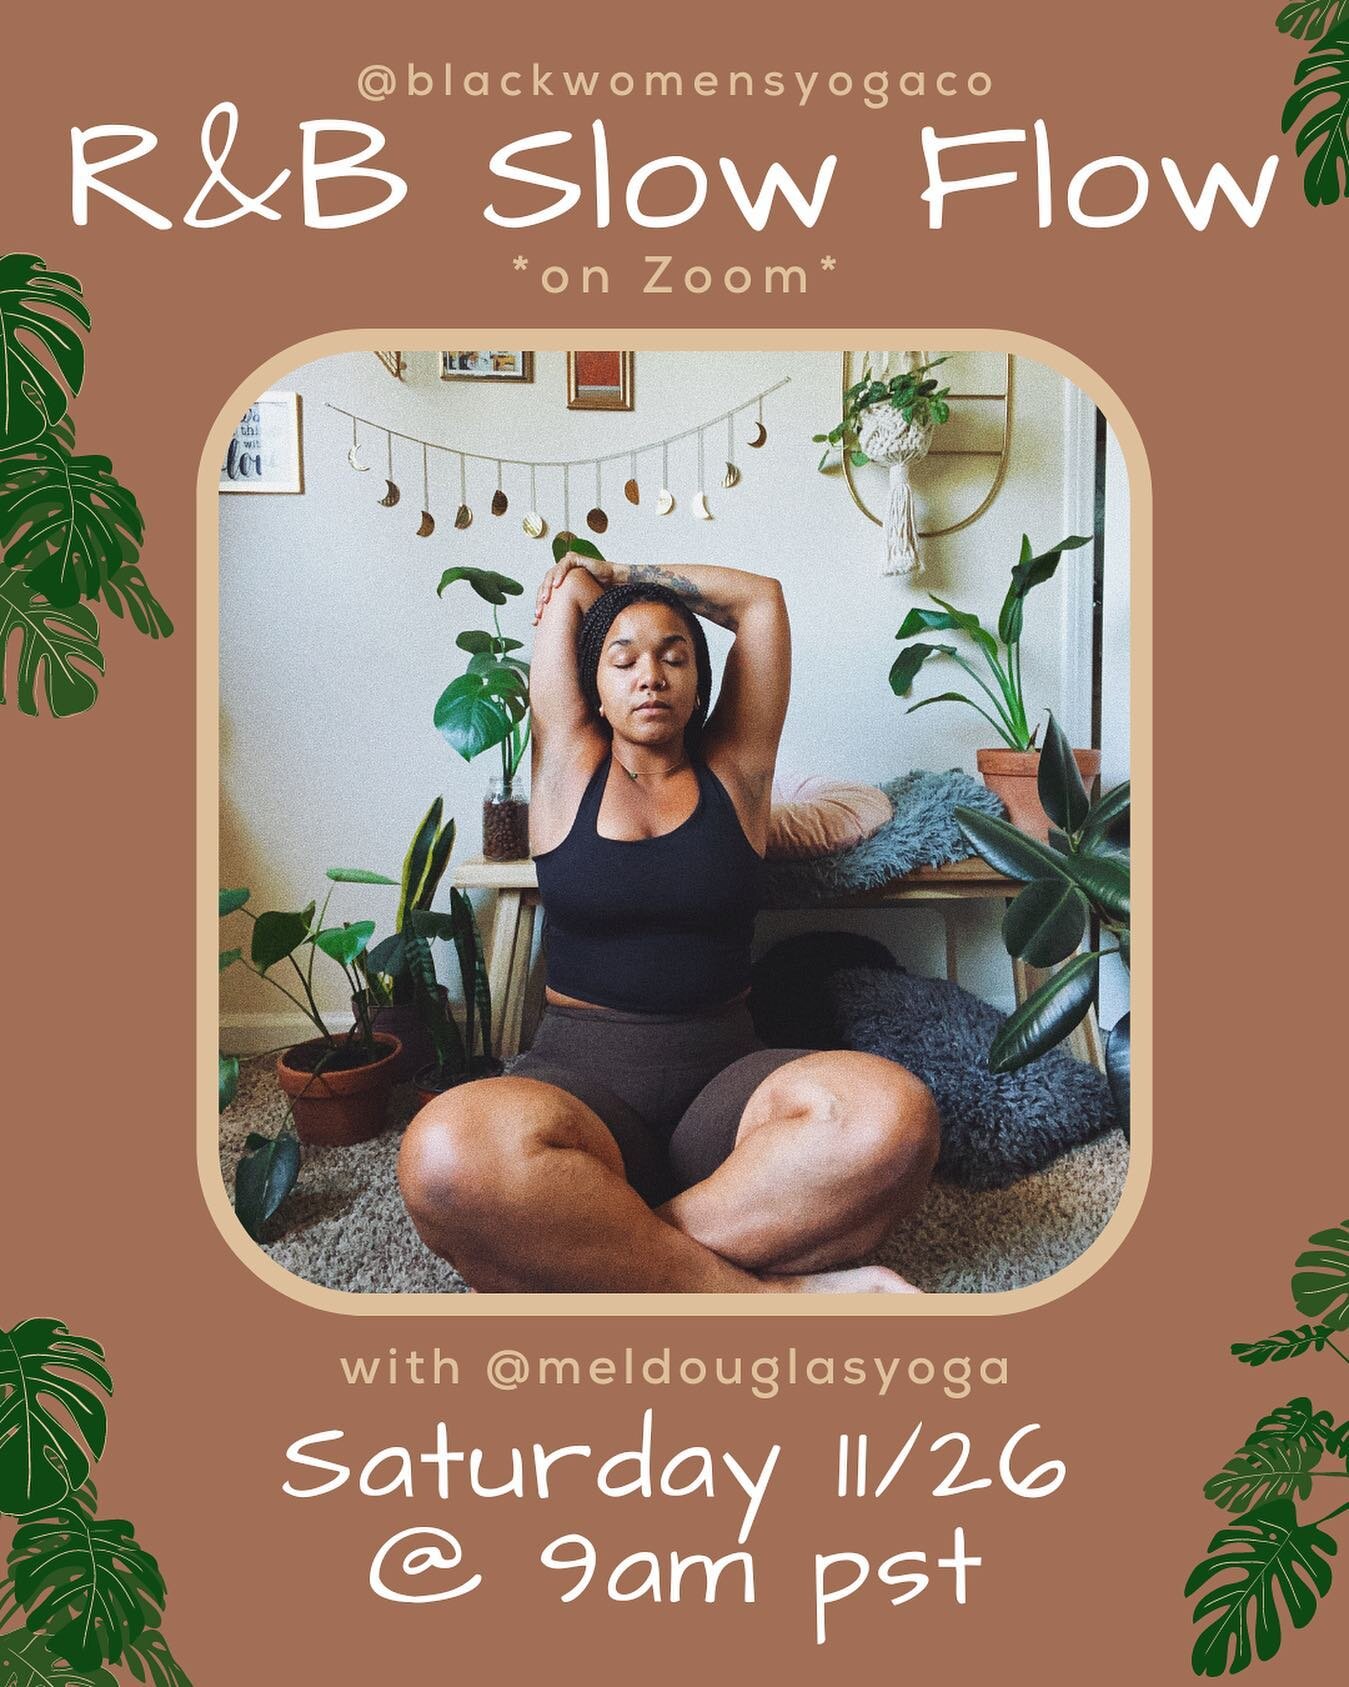 Join us tomorrow morning for our final R&amp;B Slow Flow of November with @meldouglasyoga 💃🏽

This is a slow vinyasa flow set to your fave r&amp;b hits. This class is great for beginners and lots of modifications are offered throughout ✨

Link in b